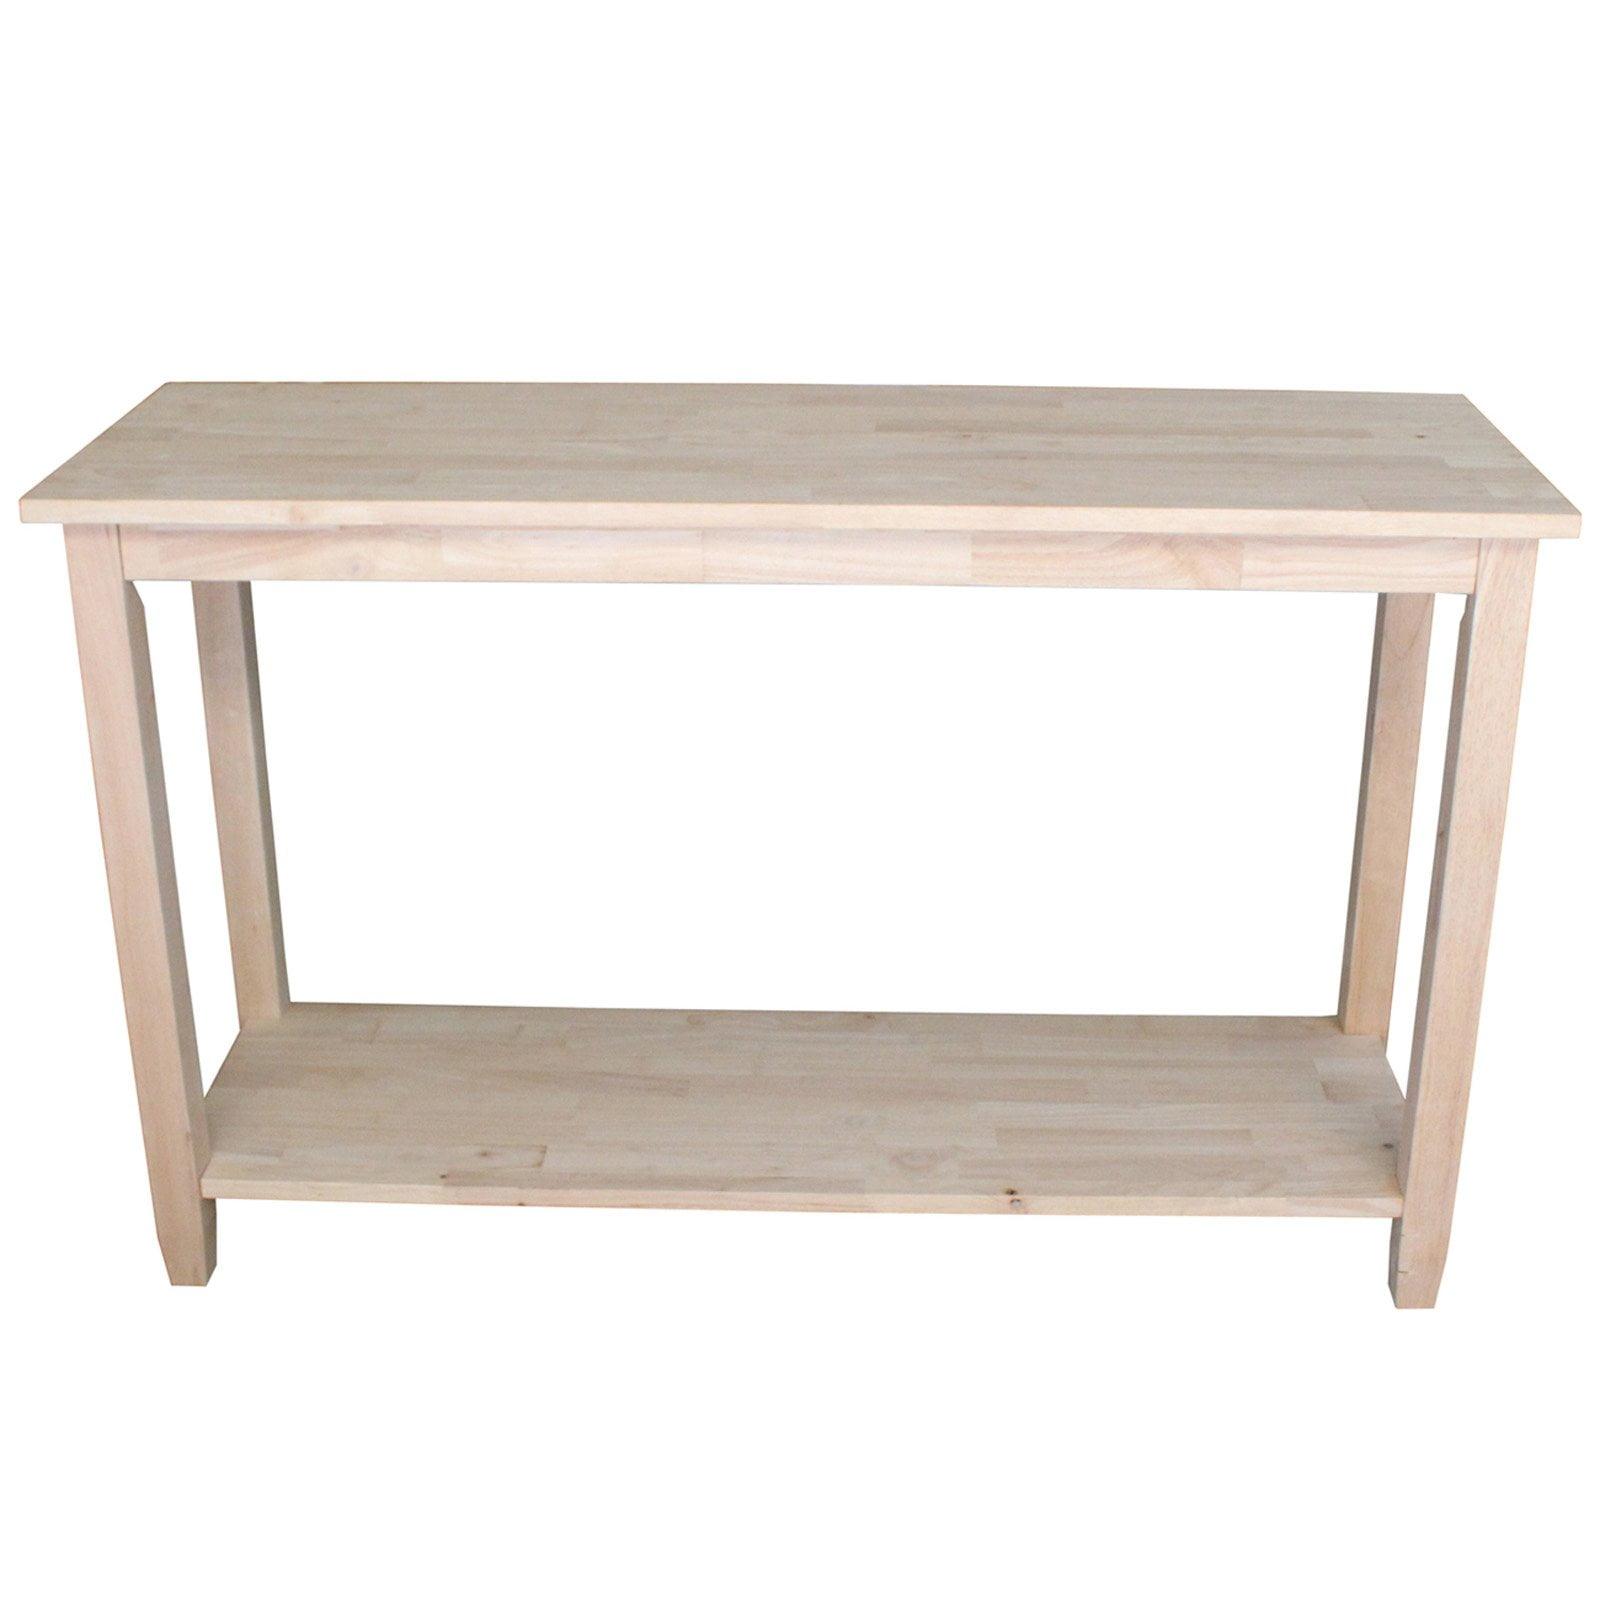 Solano Unfinished Solid Wood Console Table with Storage Shelf